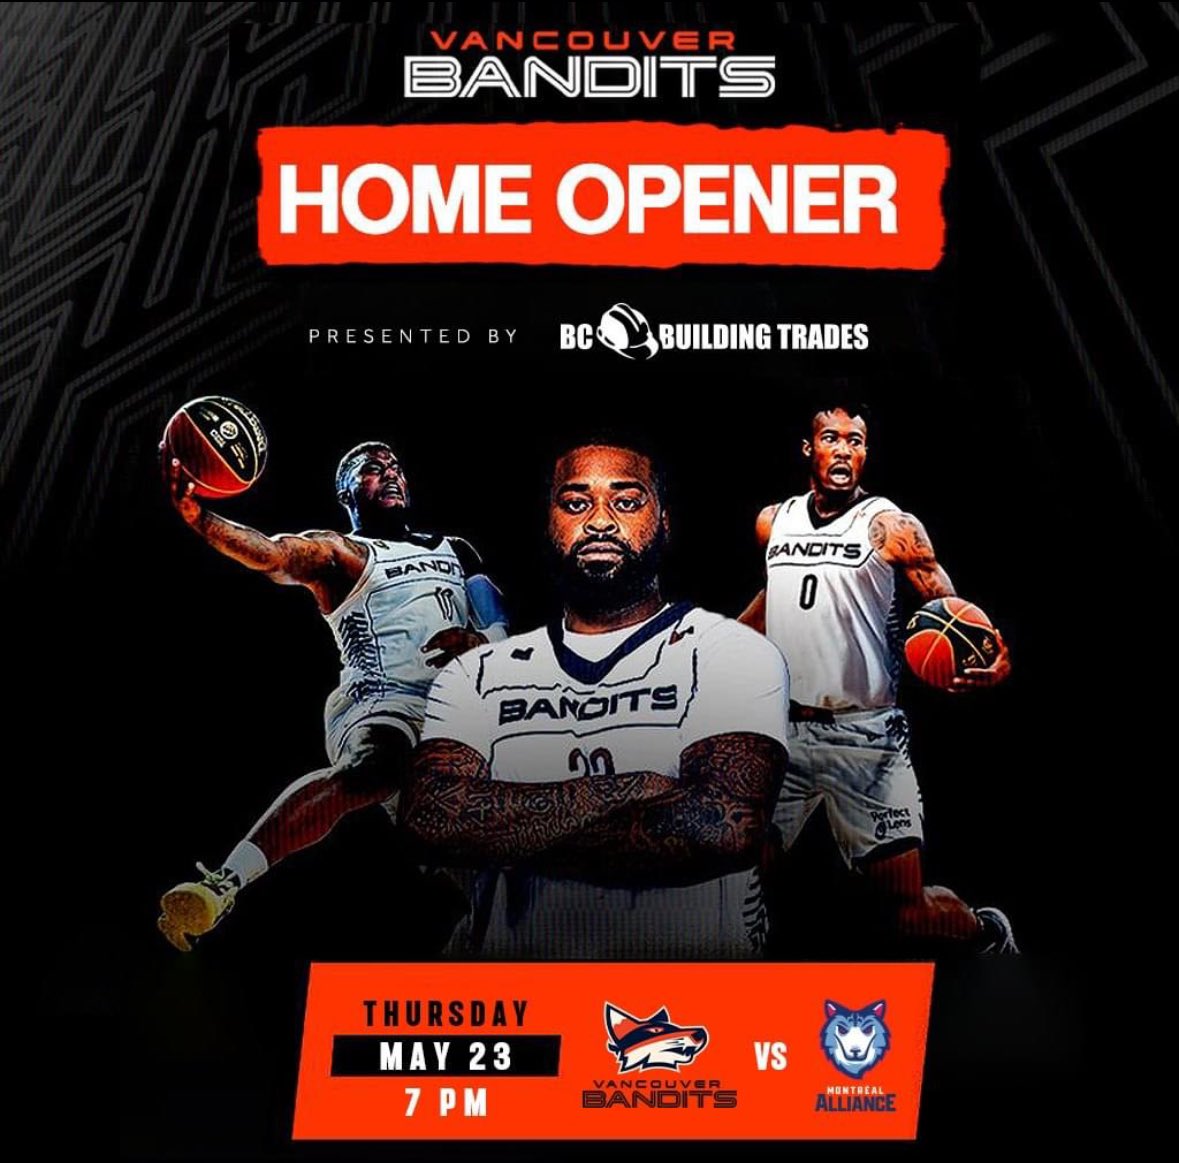 HOOPS TICKETS FOR MEMBERS We are the proud presenting sponsor of the @vancitybandits May 23rd home opener at @LangleyEvents! We have 50 tickets to give away to our members. Email info@bcbuildingtrades.org with your name and union to claim.